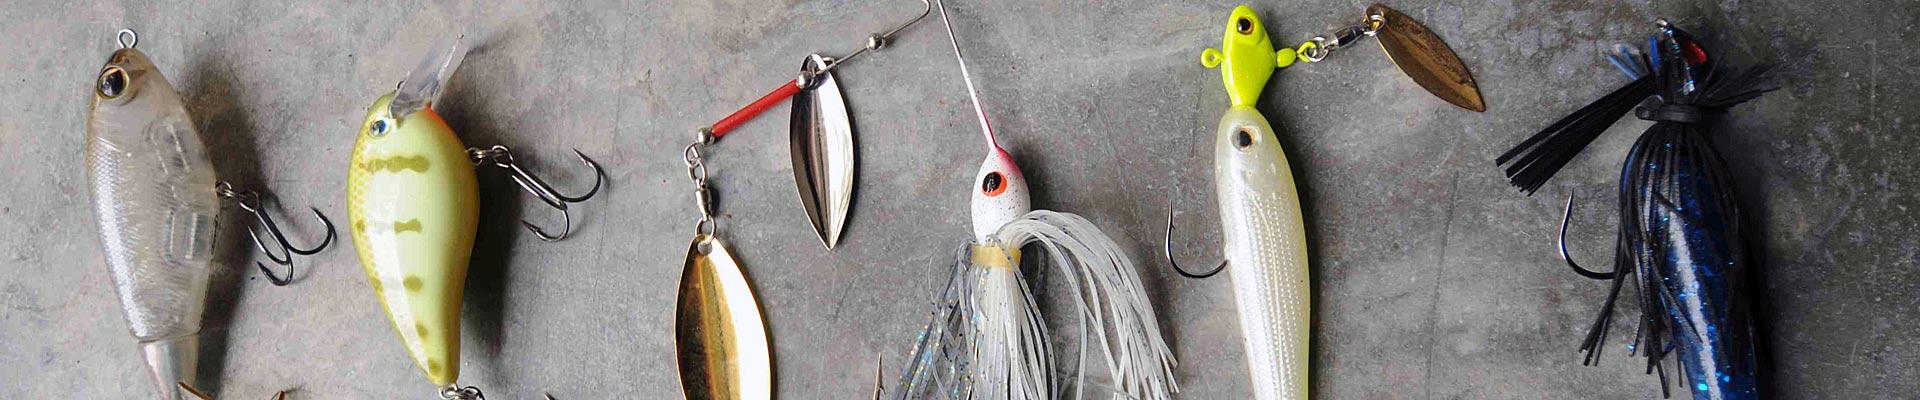 Reaction Baits for Springtime Bass  The Ultimate Bass Fishing Resource  Guide® LLC